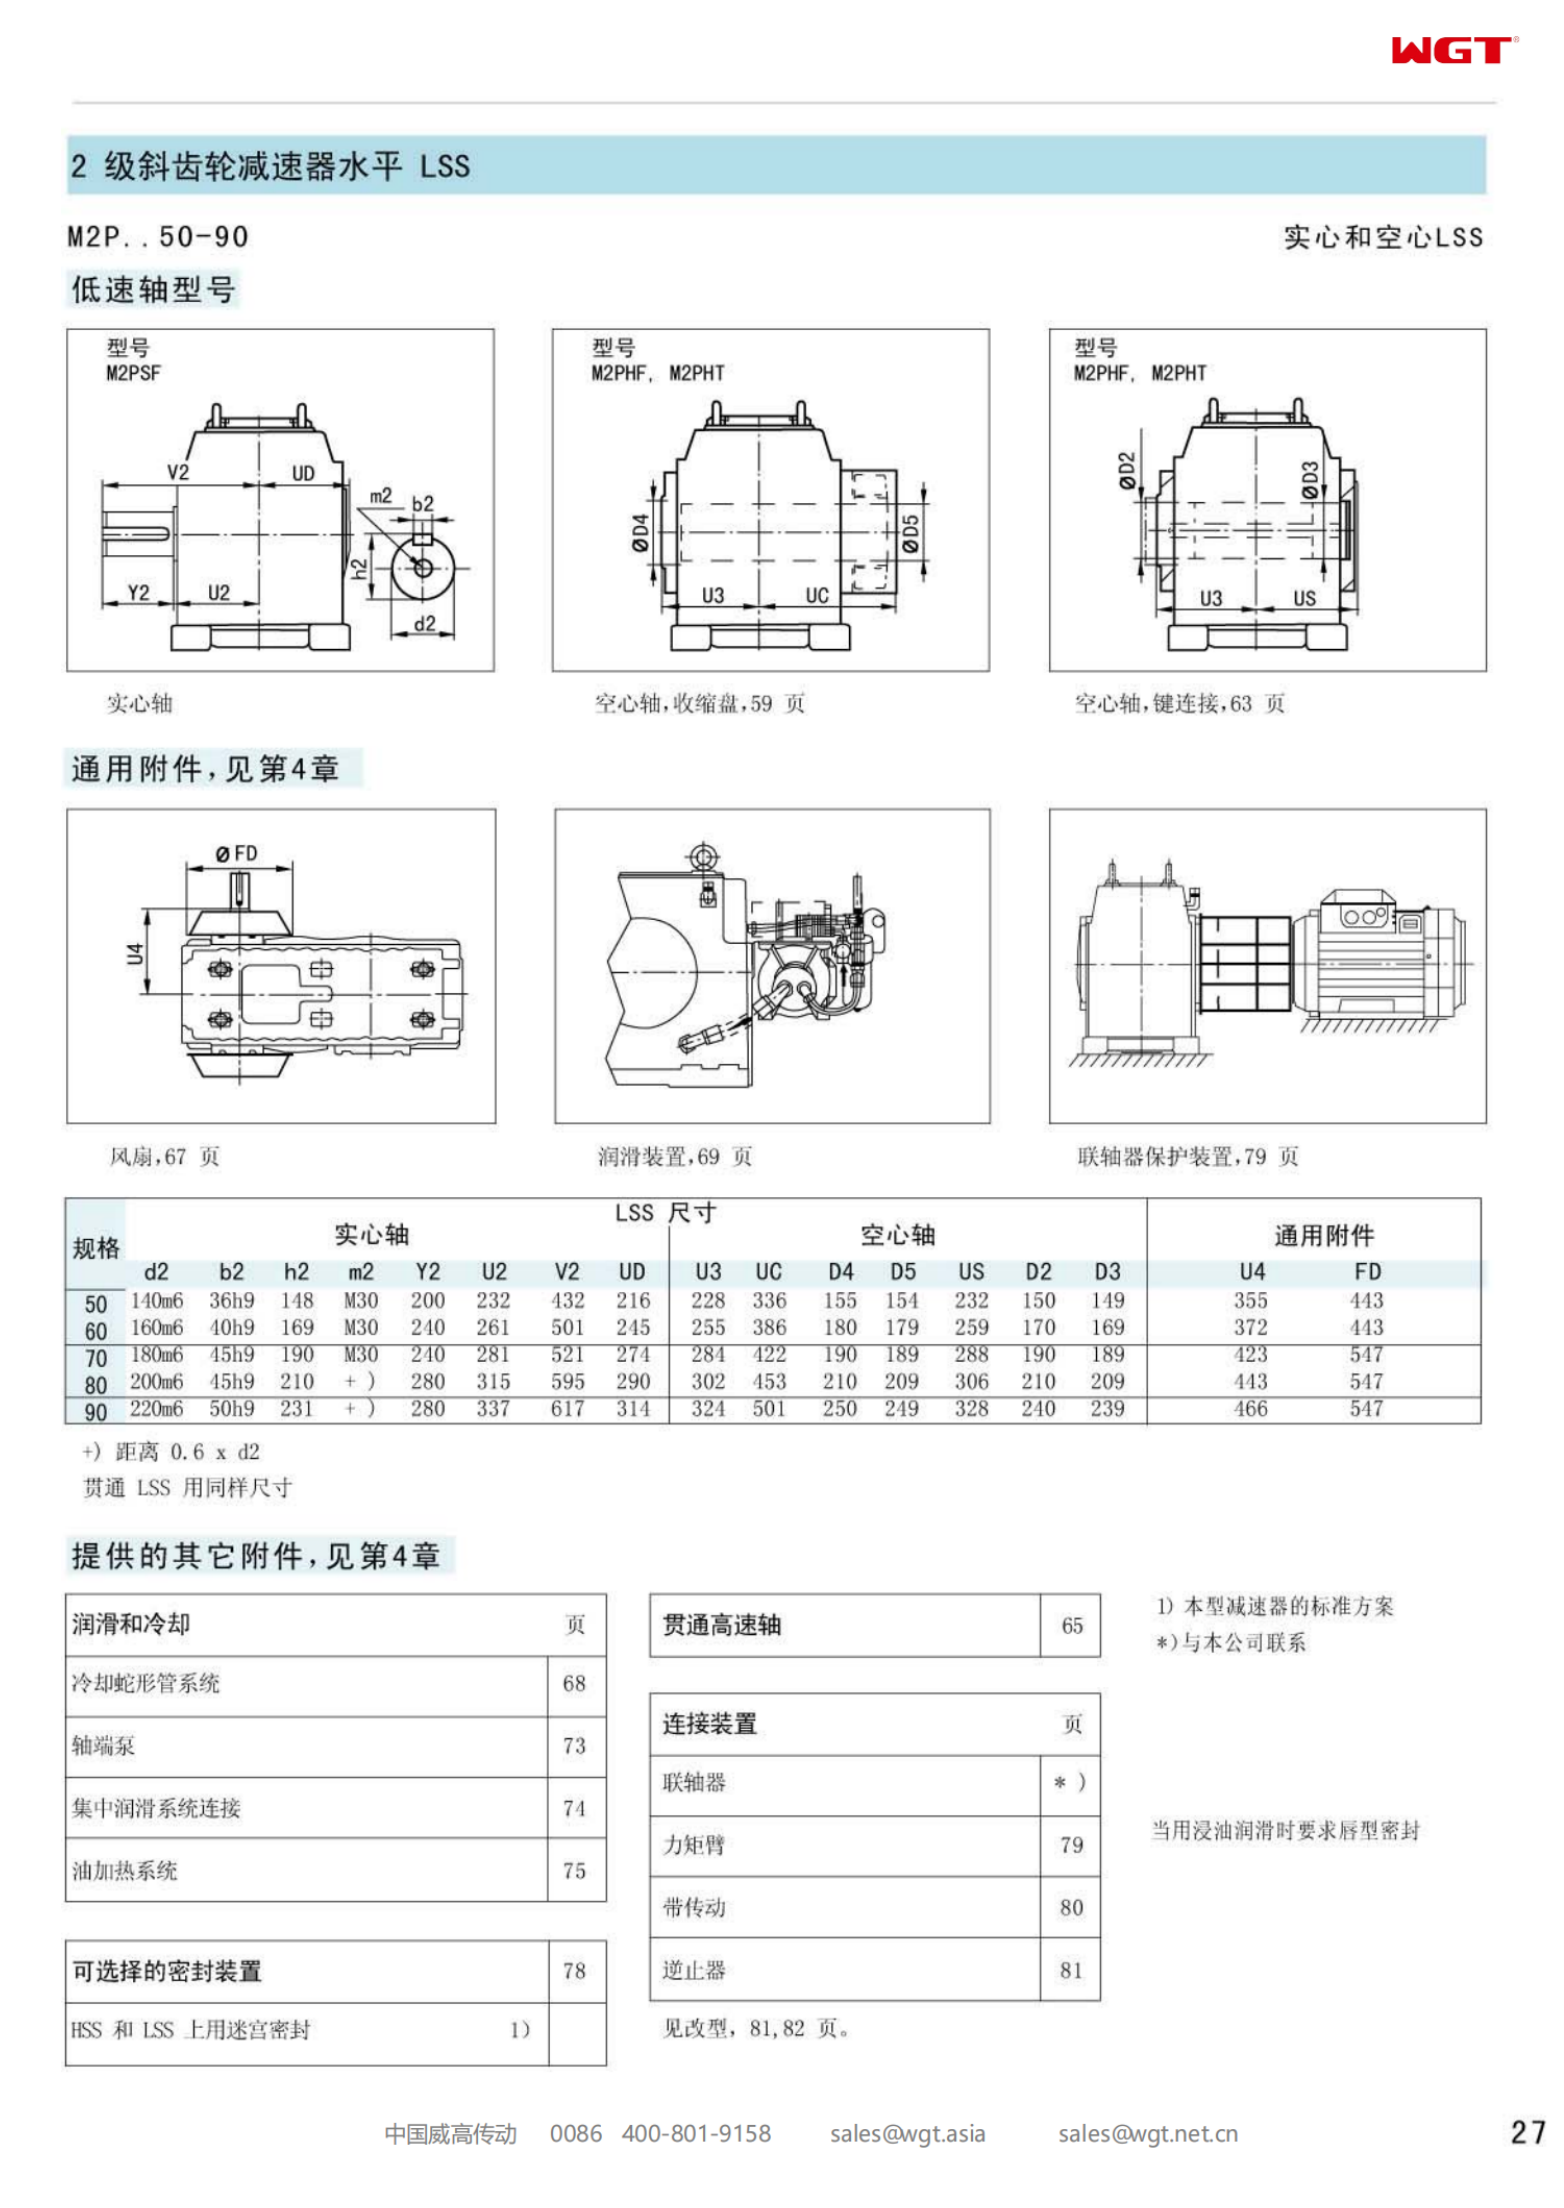 M2PHF50 Replace_SEW_M_Series Gearbox